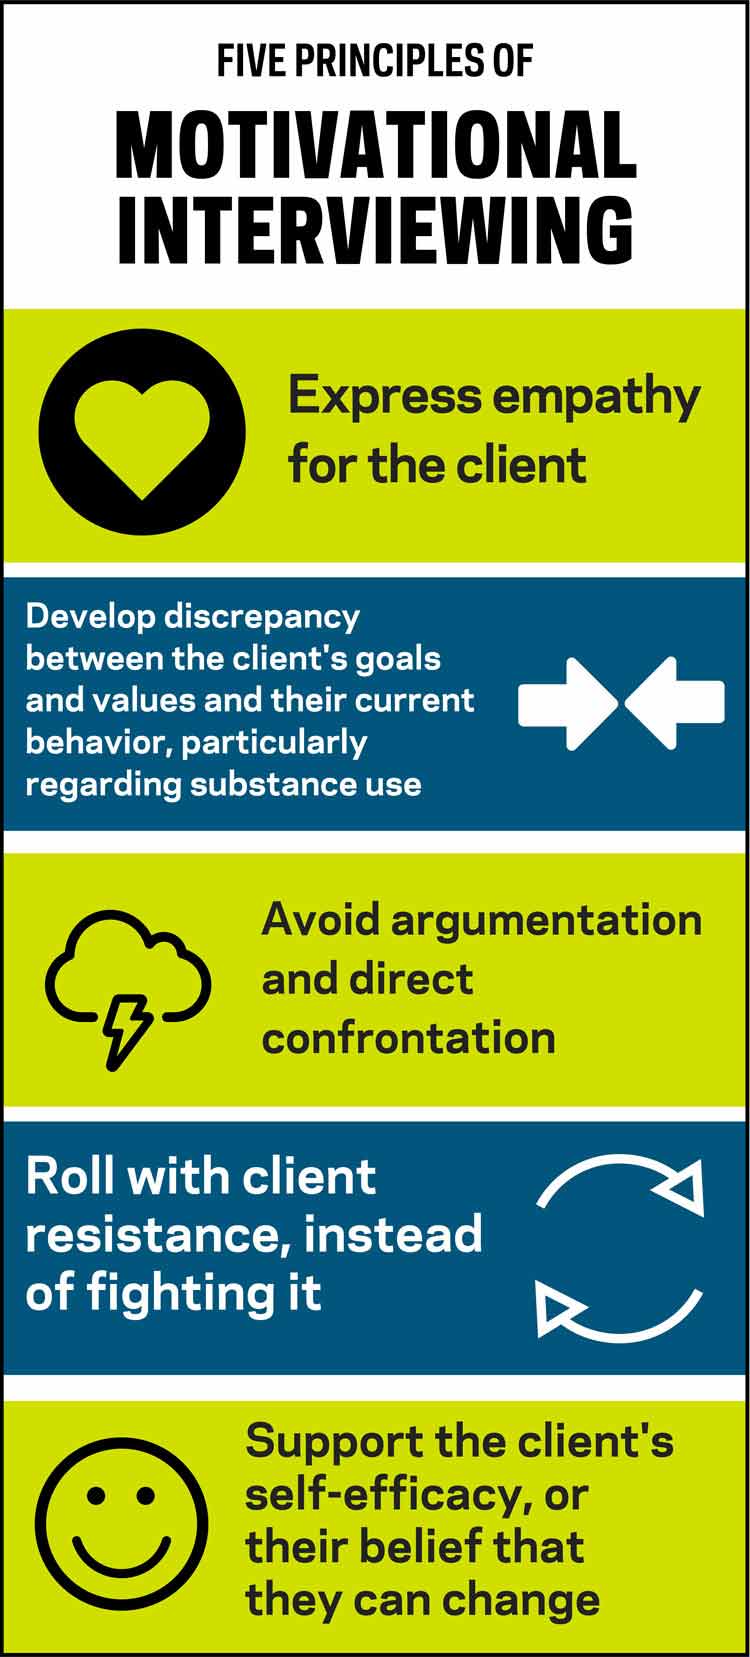 five principles of motivational interviewing infographic